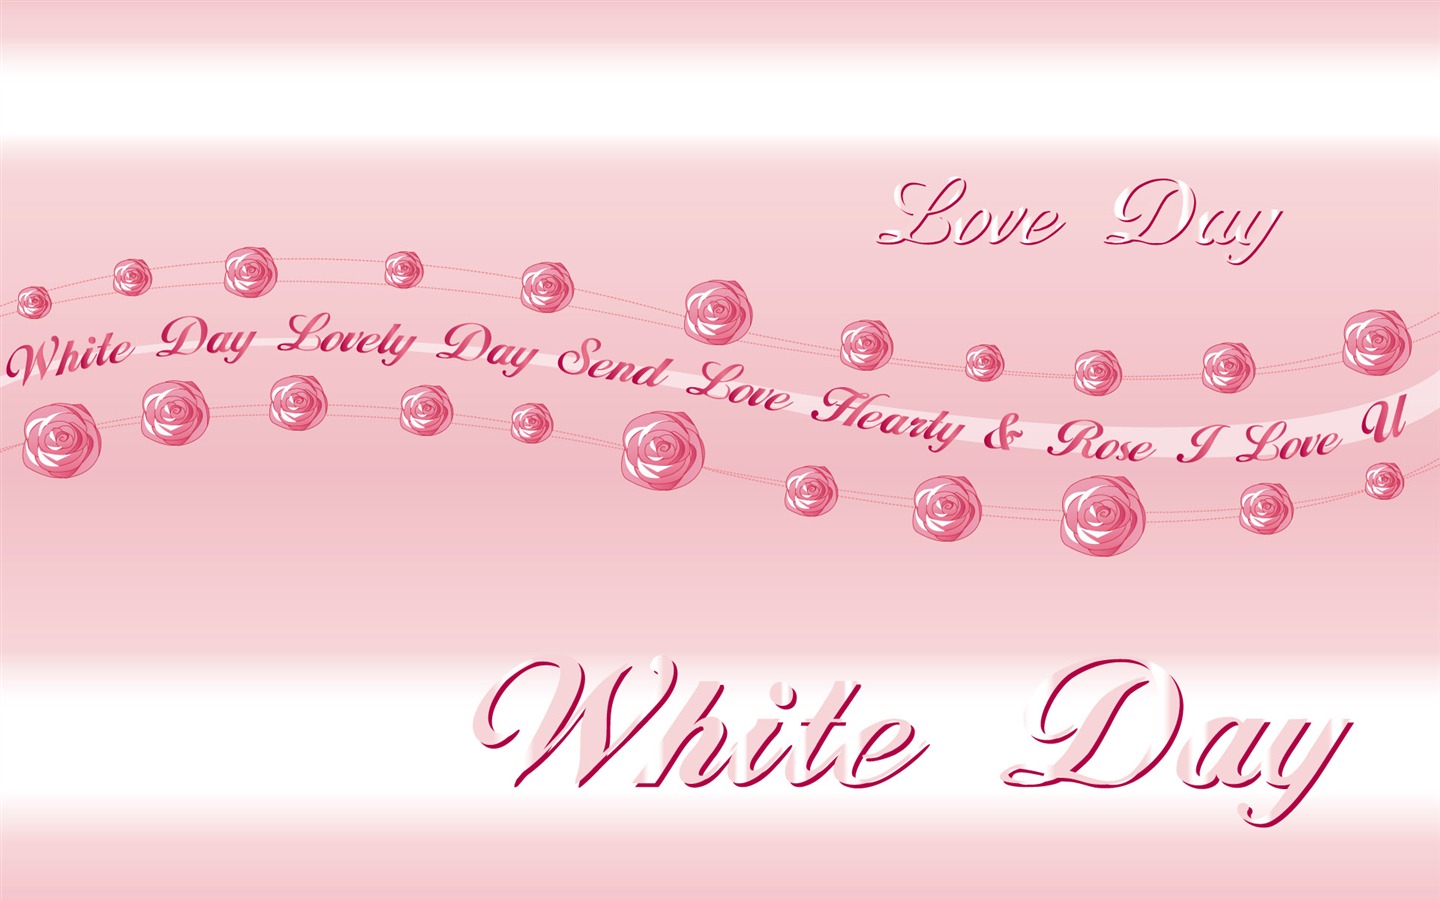 Valentine's Day Theme Wallpapers (2) #10 - 1440x900